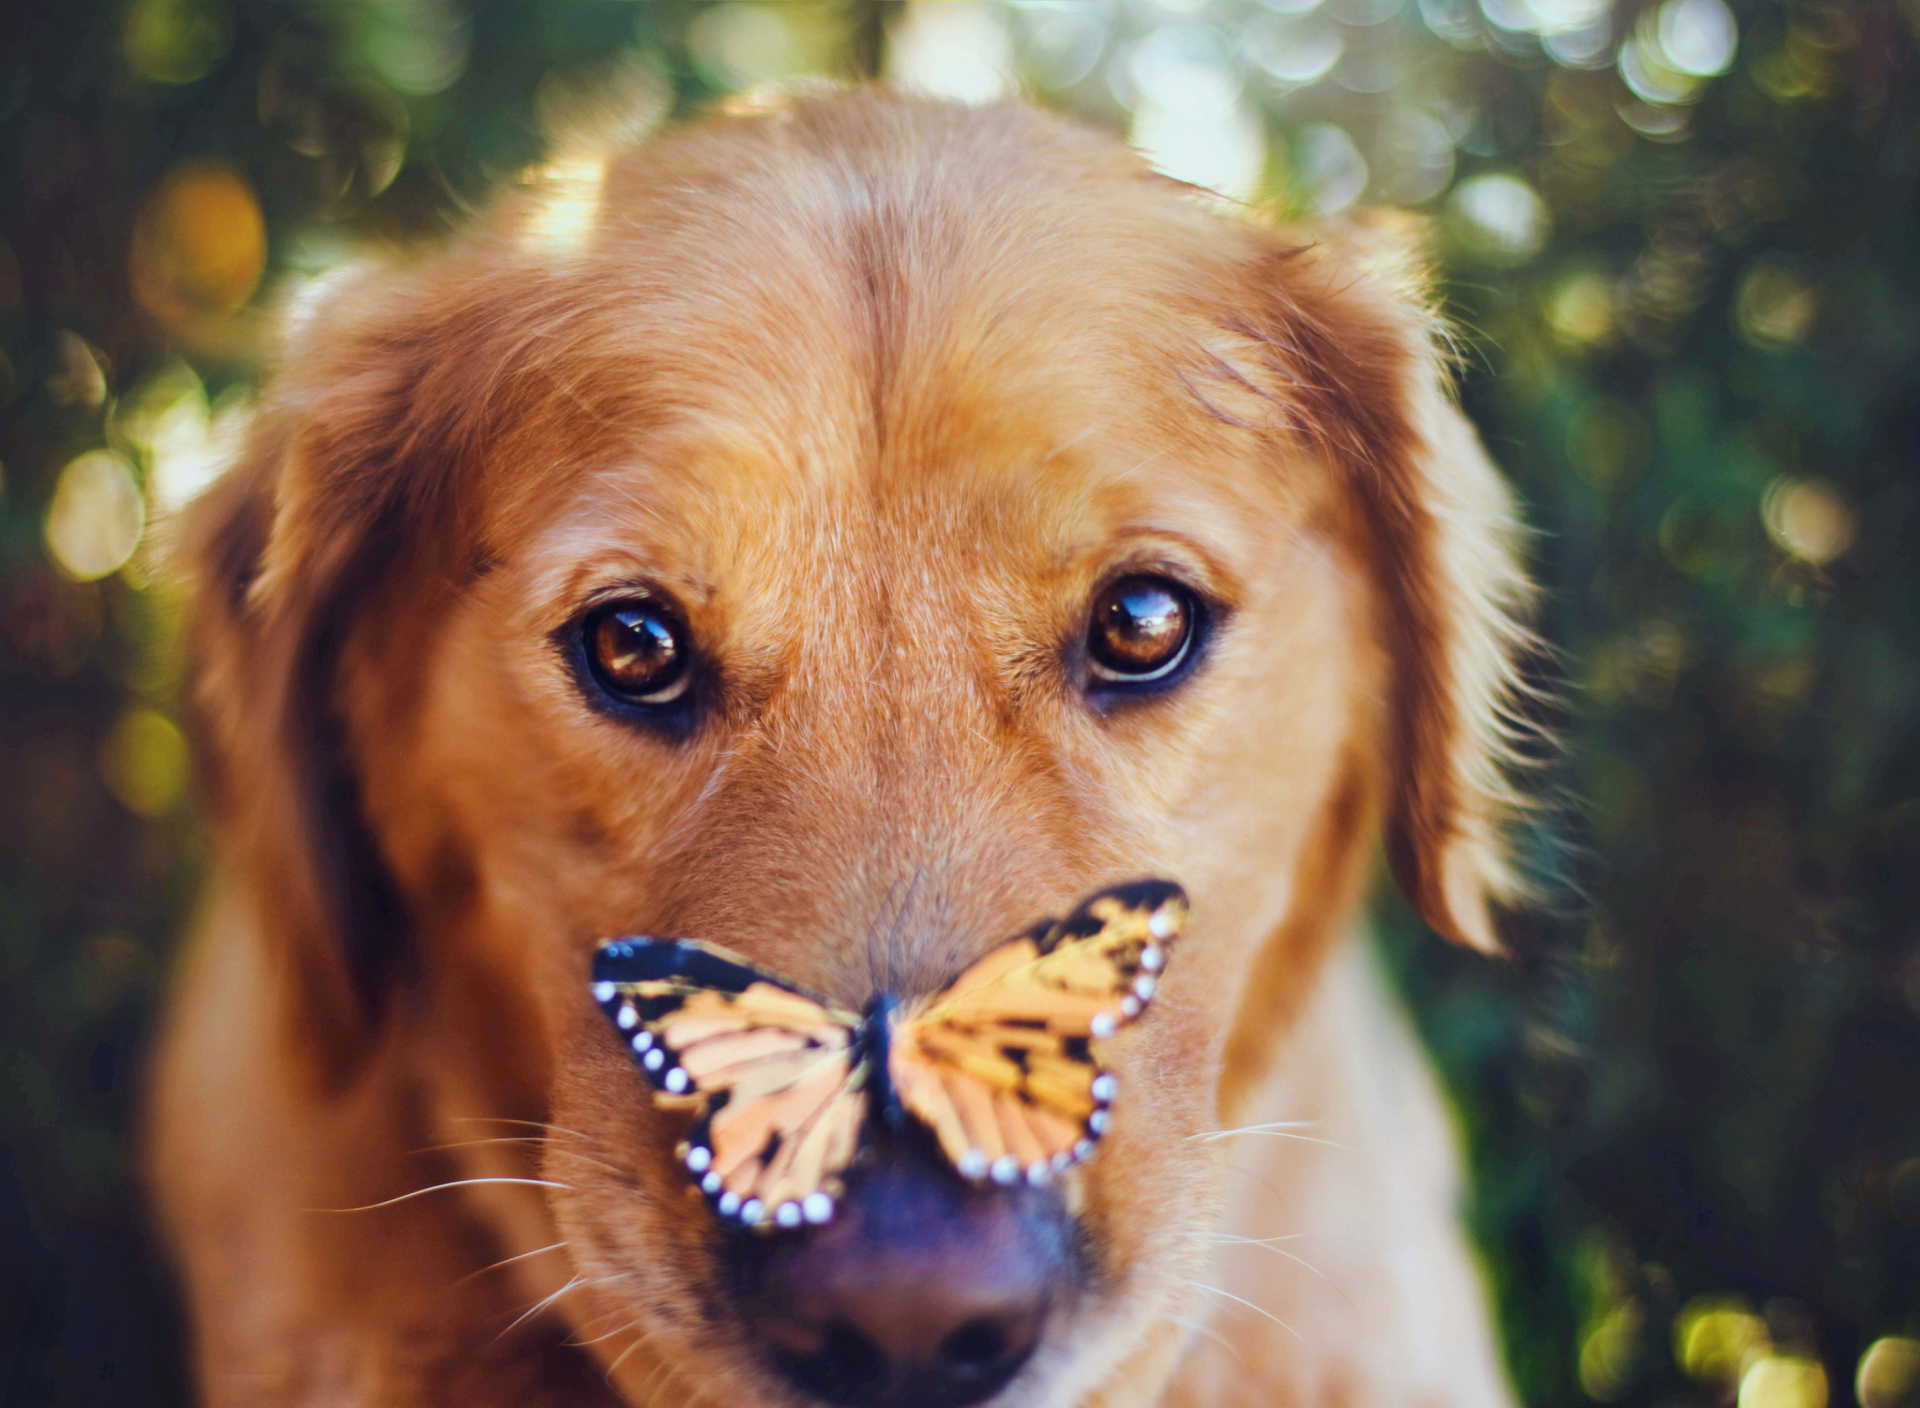 Dog And Butterfly wallpaper 1920x1408